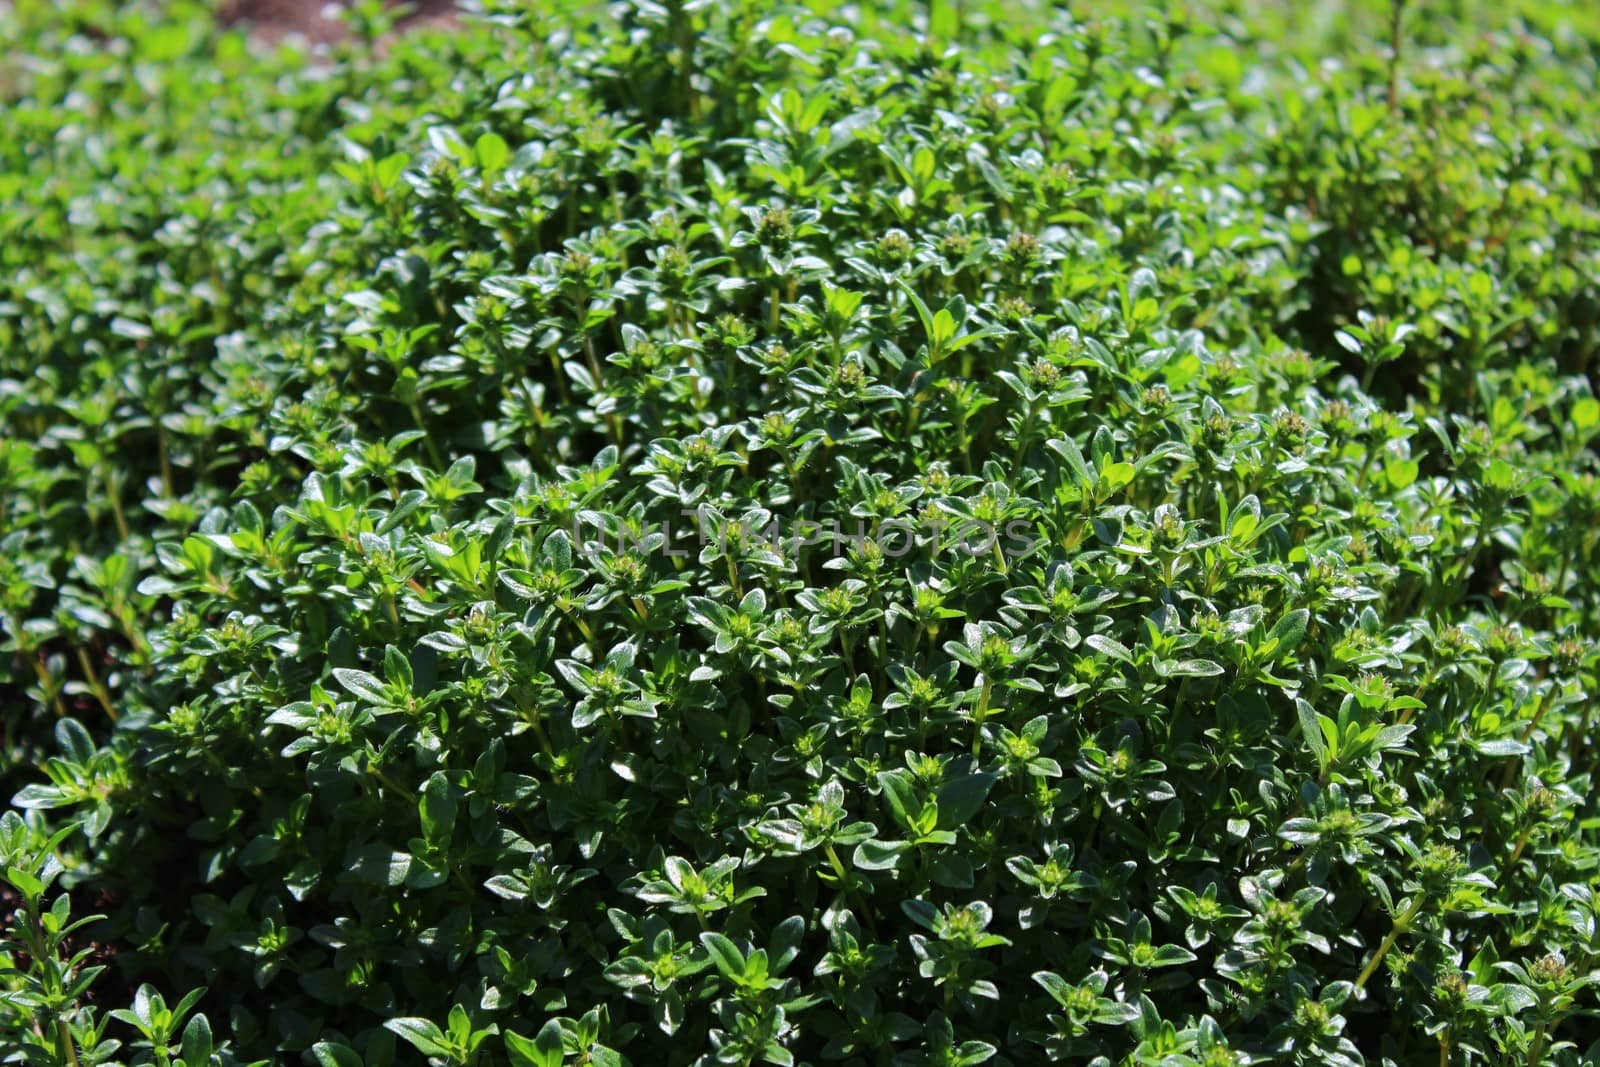 The picture shows a field of thyme in the garden